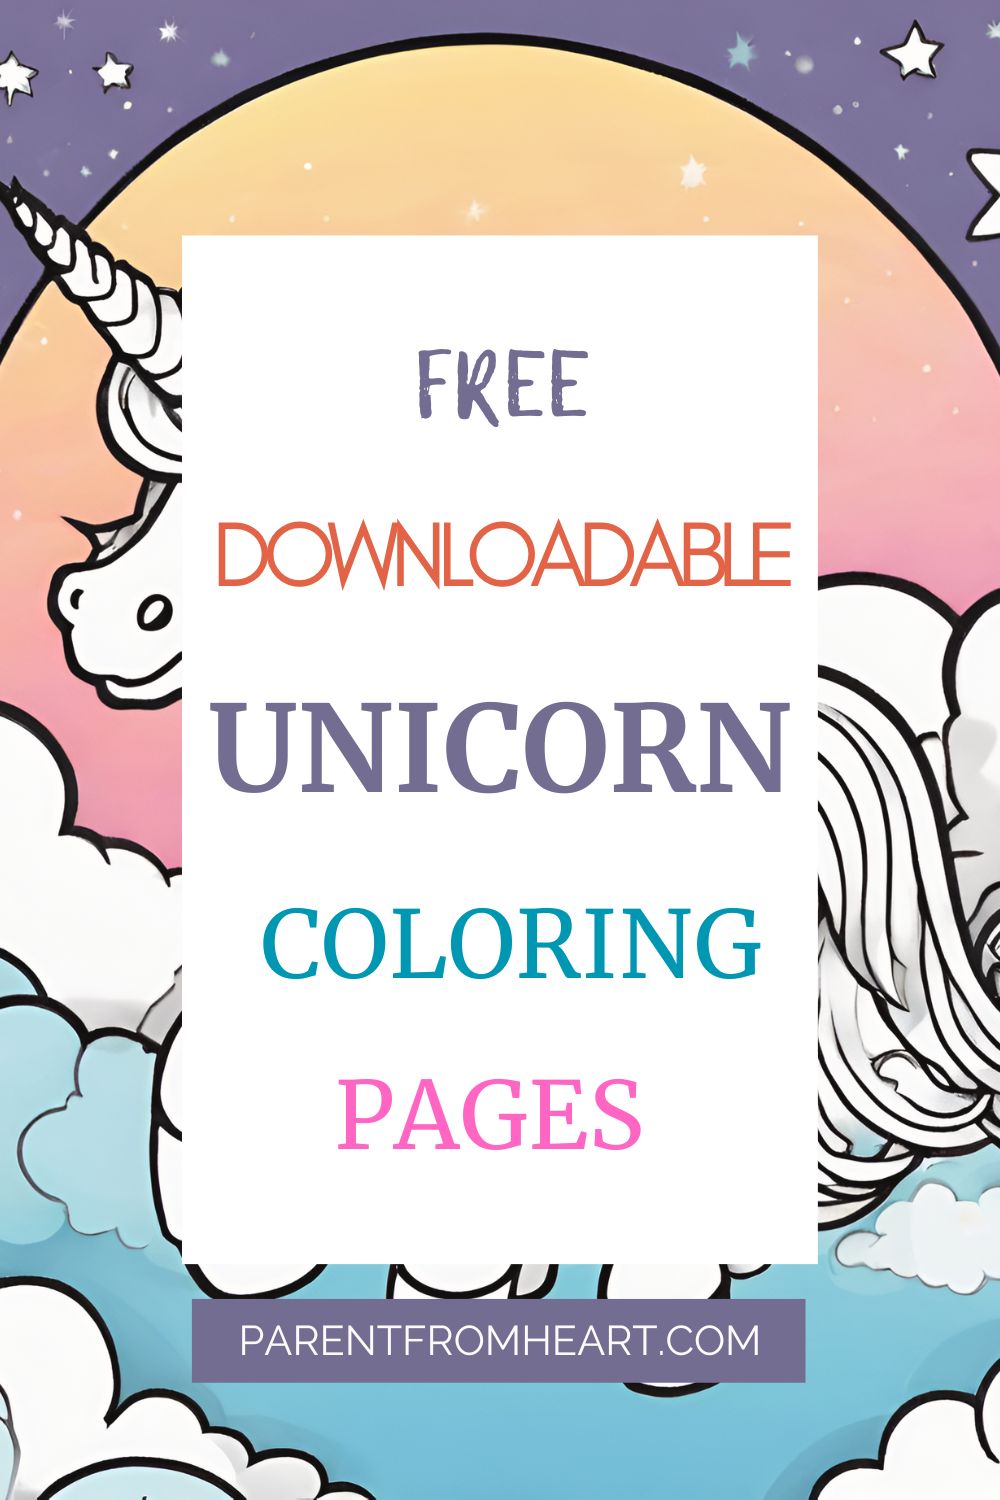 Free Downloadable Unicorn Coloring Pages